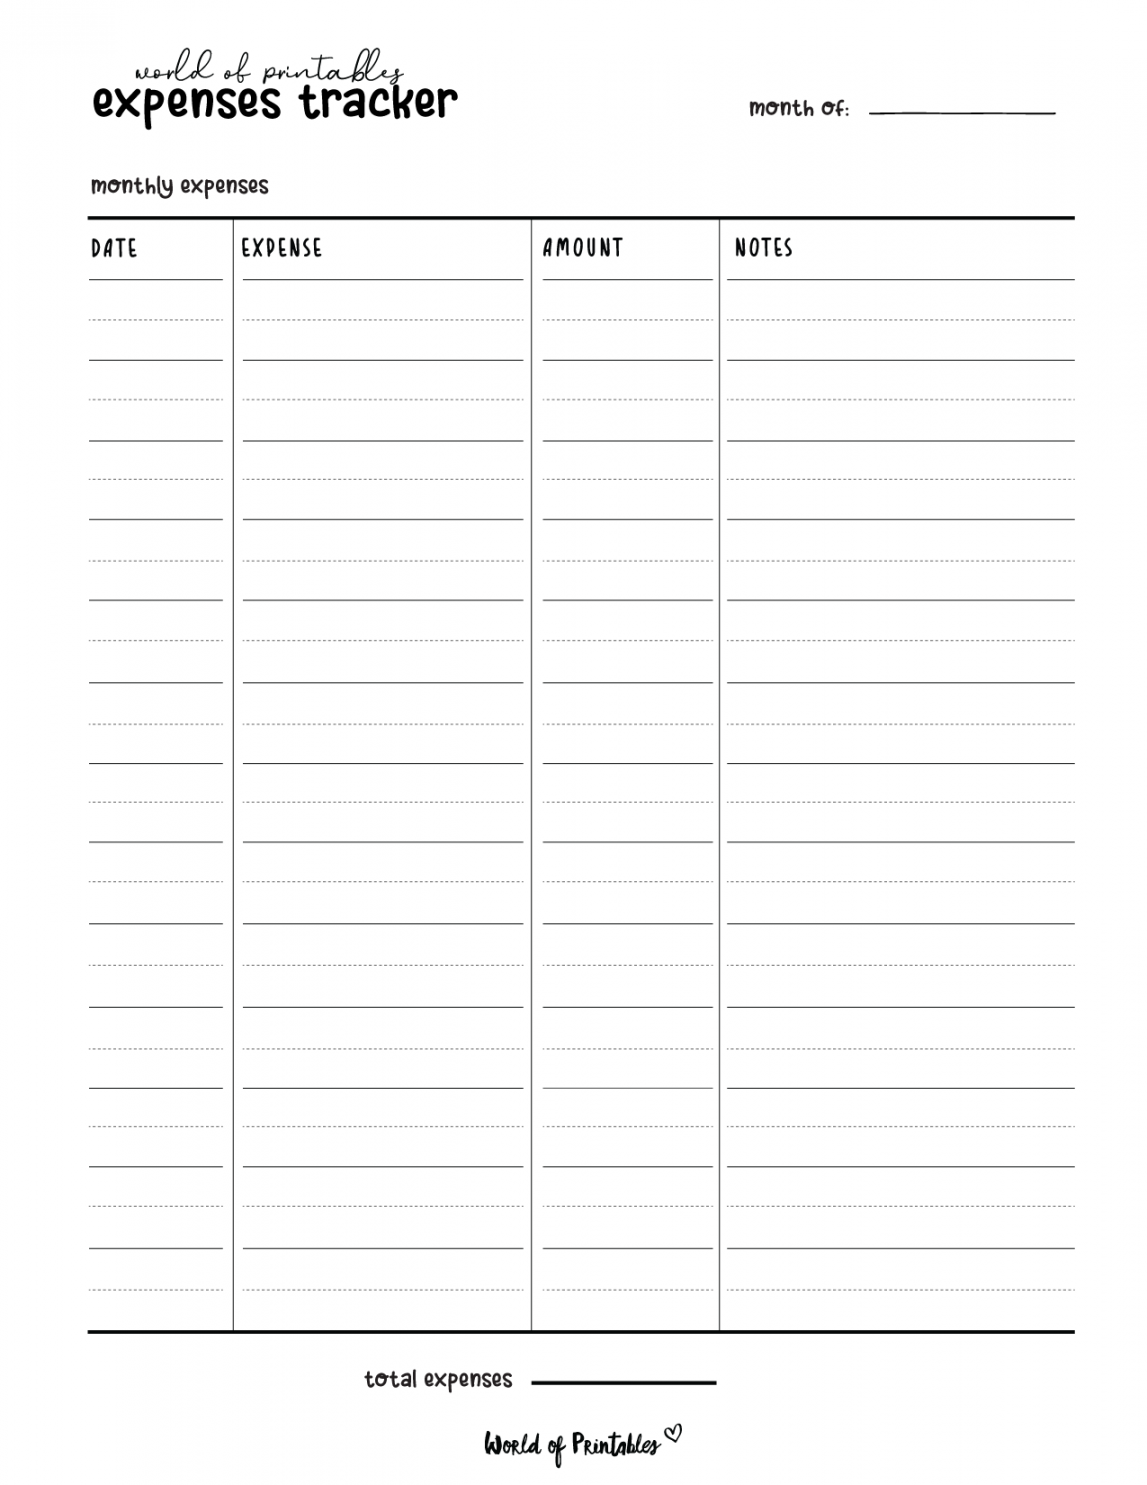 Expense Tracker Templates - World of Printables - FREE Printables - Free Printable Expense Tracker